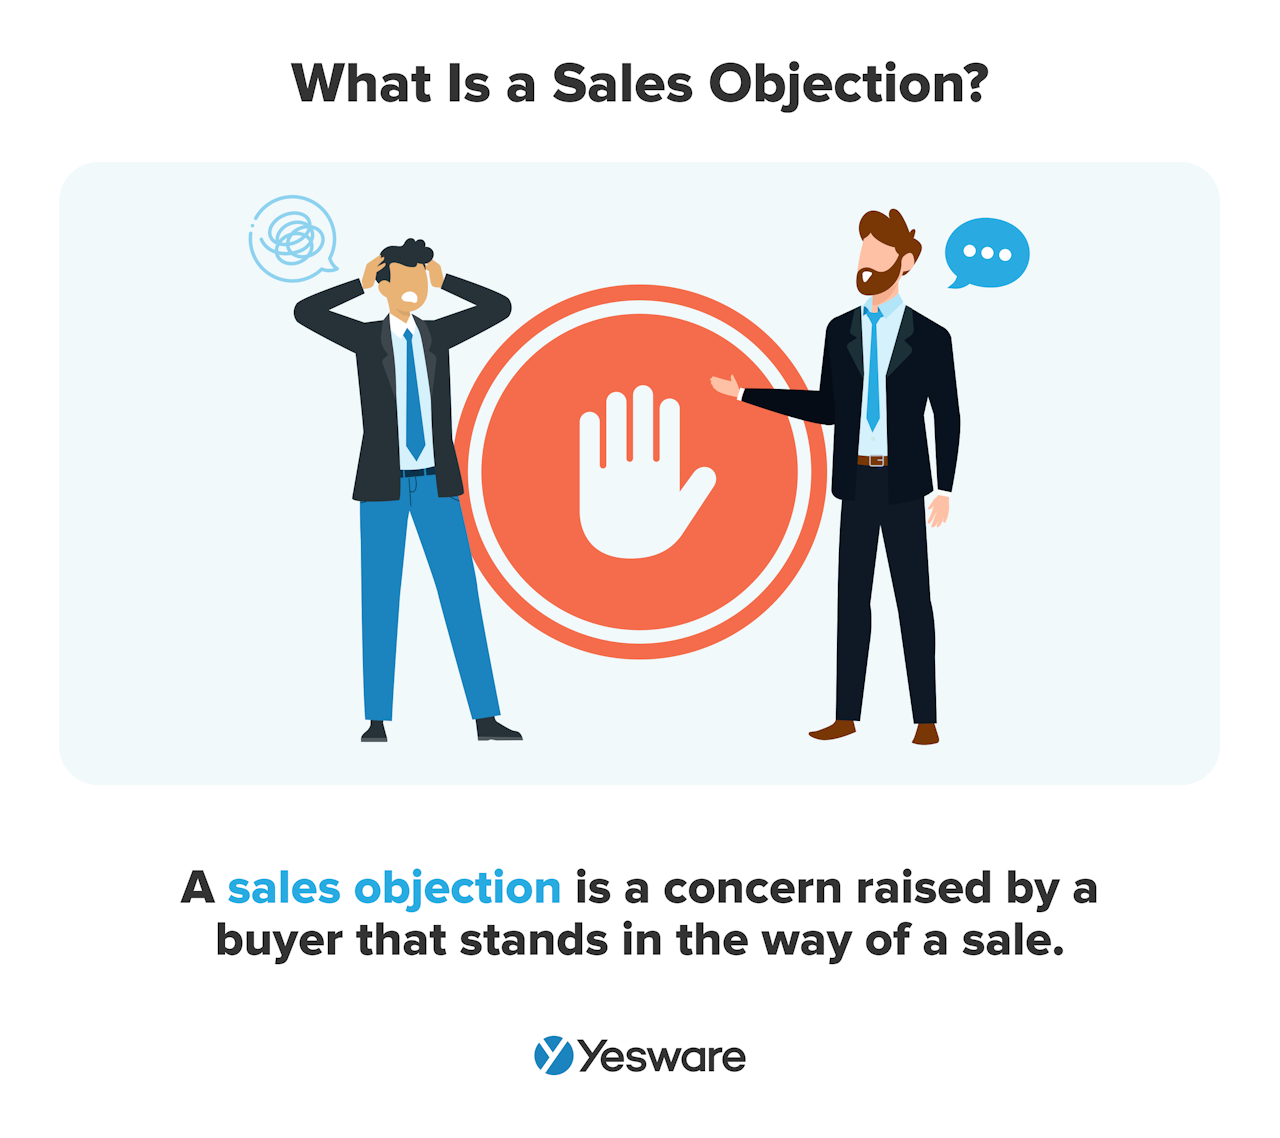 What is a sales objection?